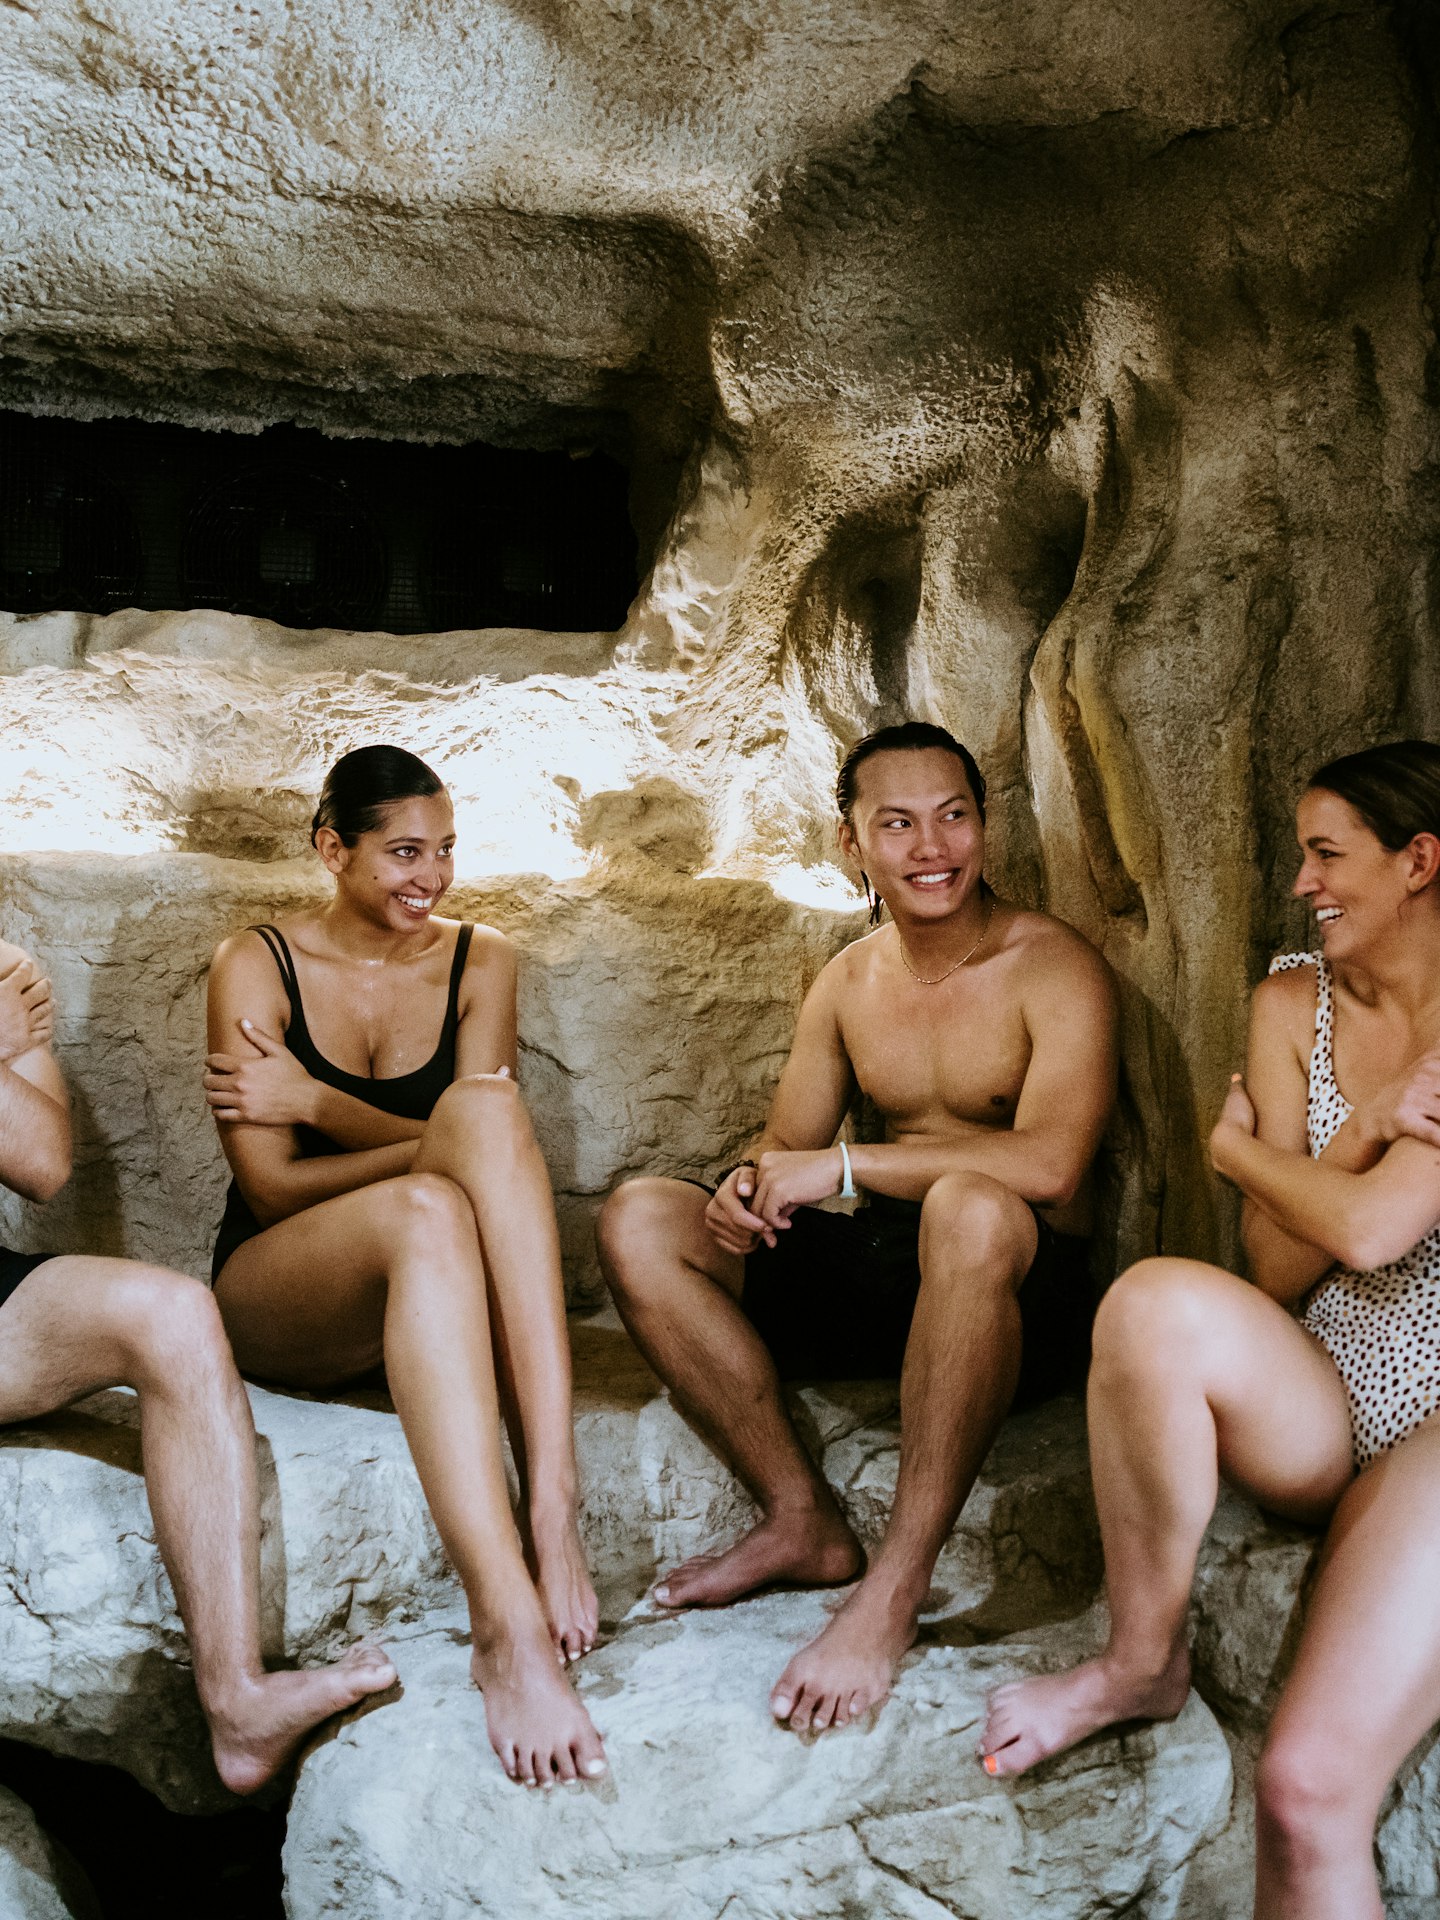 four people in bathing suits sitting in ice cave